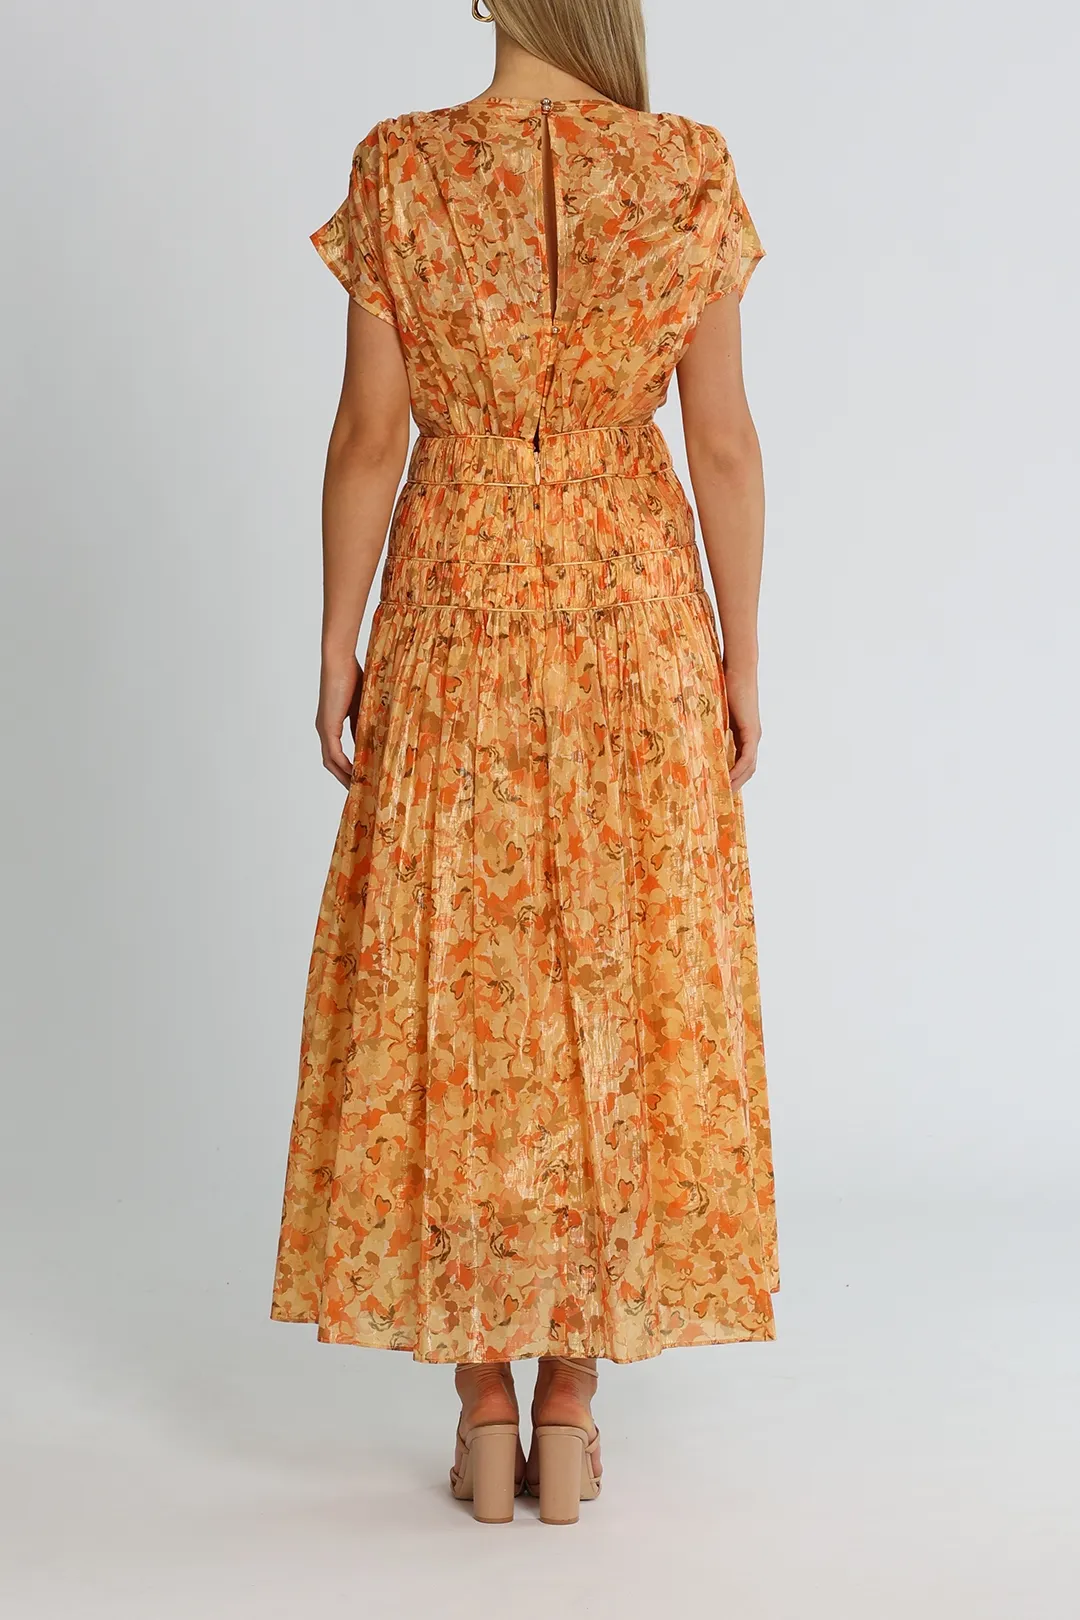 Rent the Bicknell Dress in Peach Parfait by Acler.